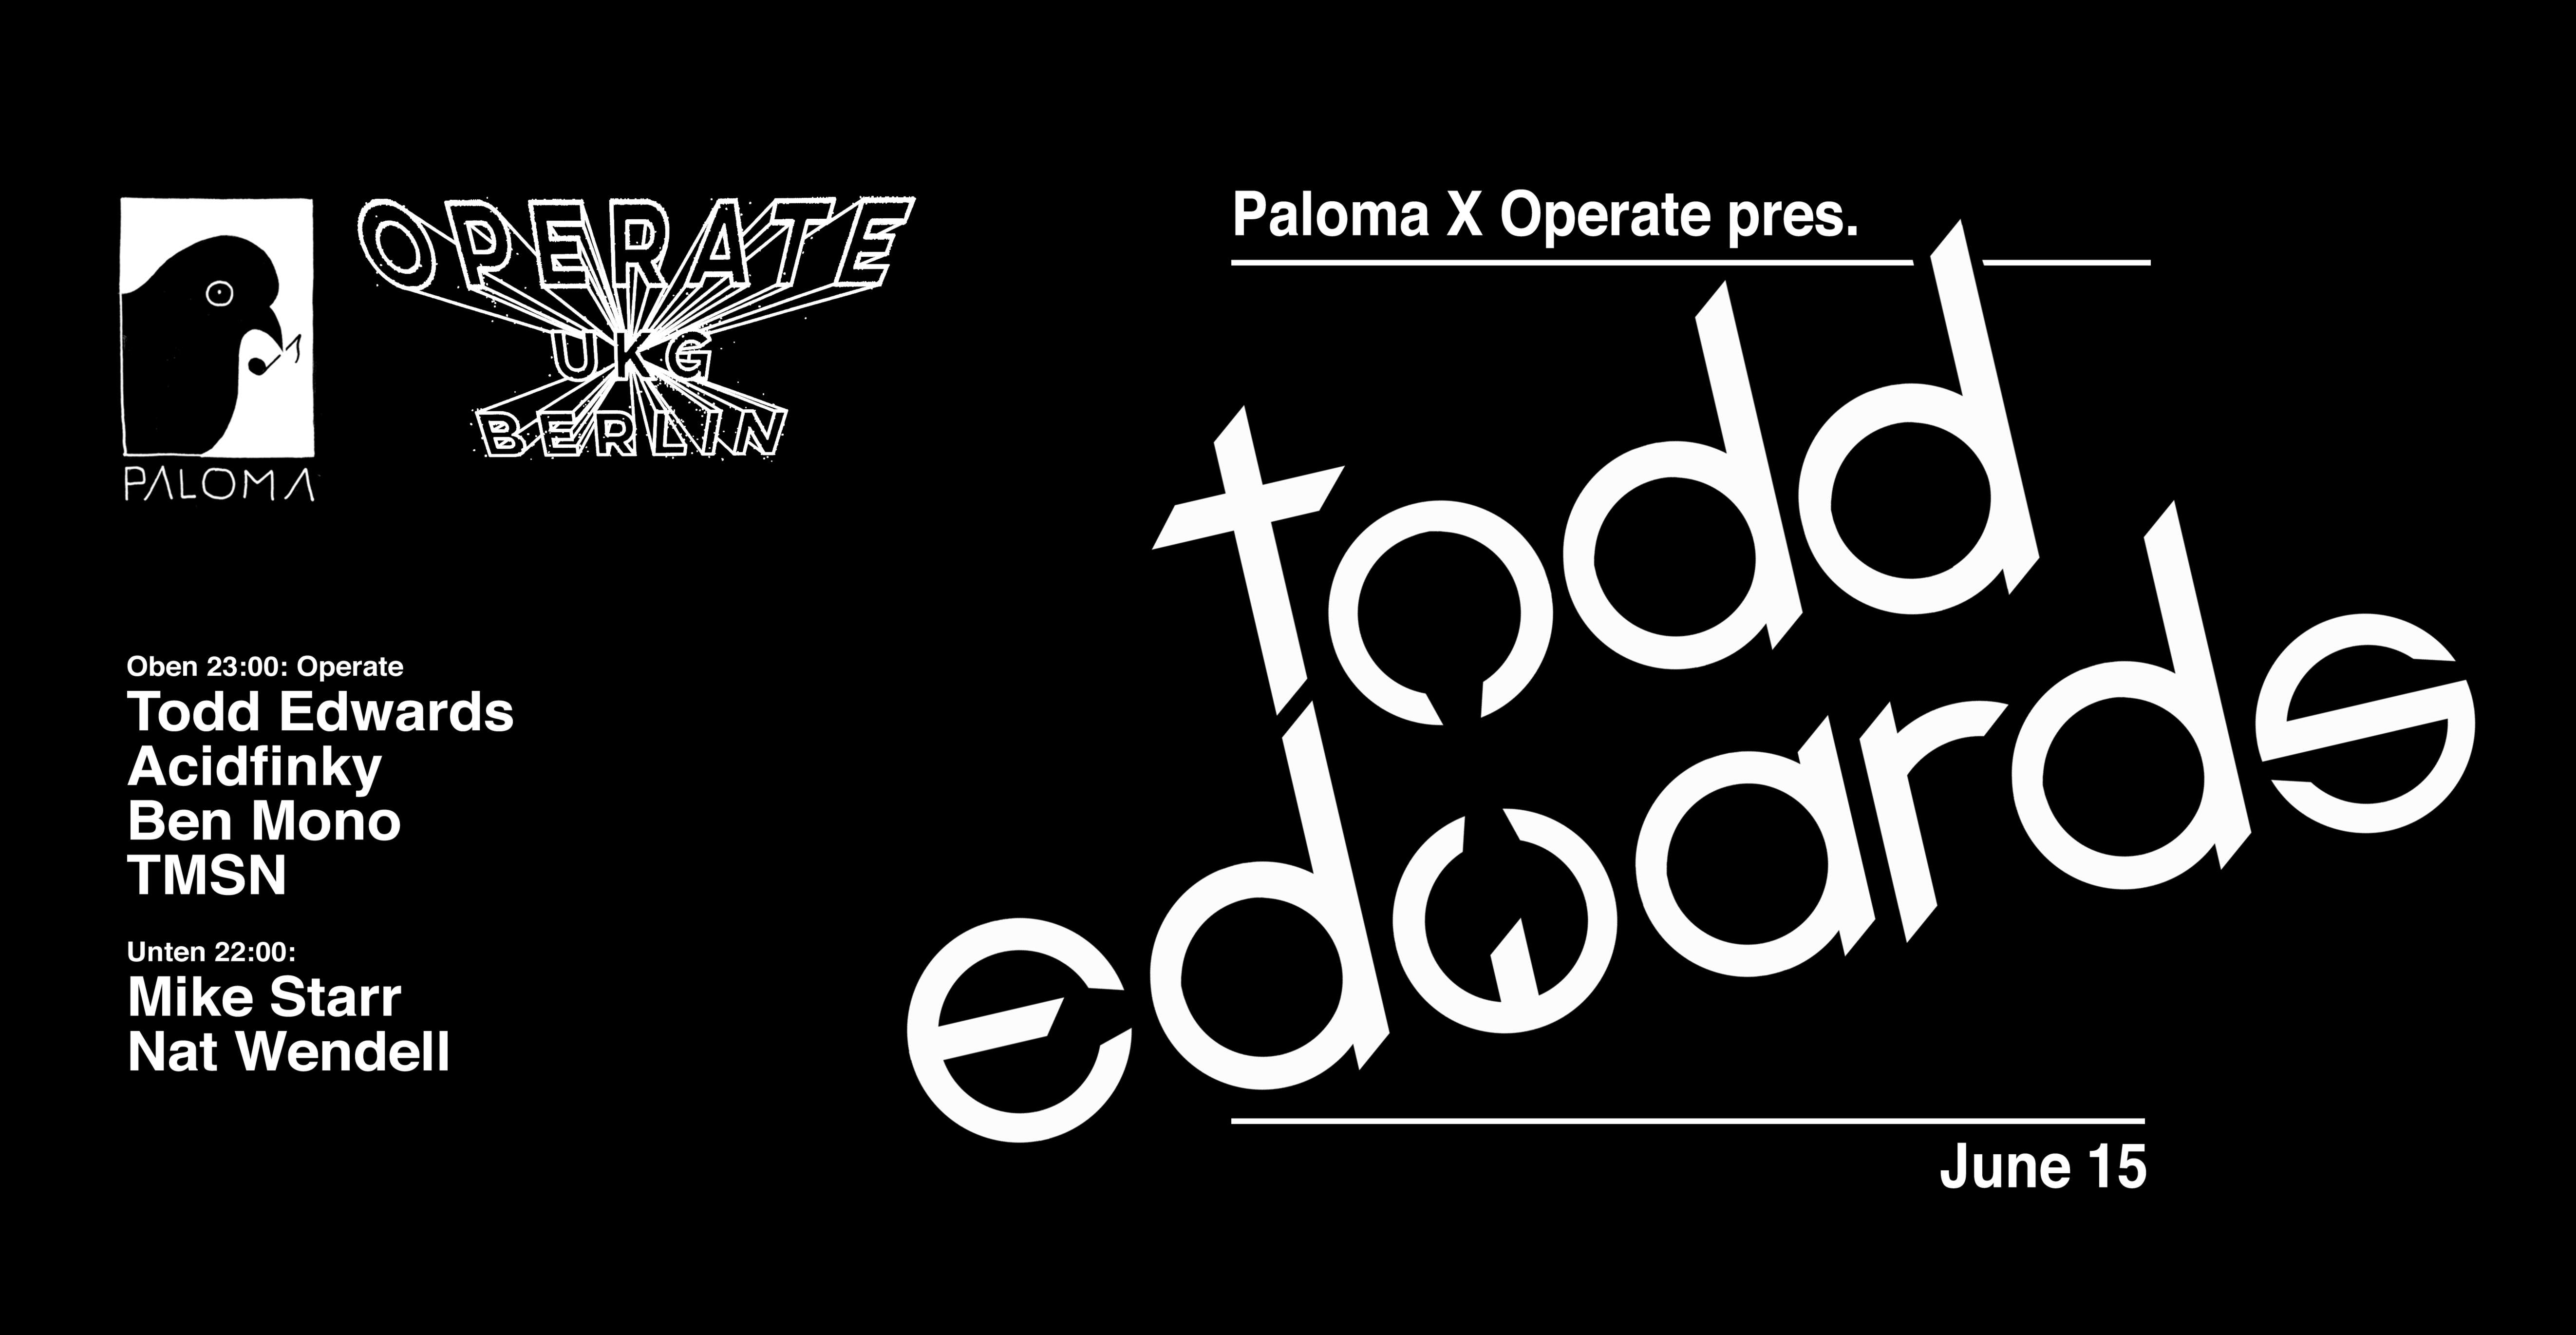 Paloma x Operate pres. Todd Edwards - フライヤー裏